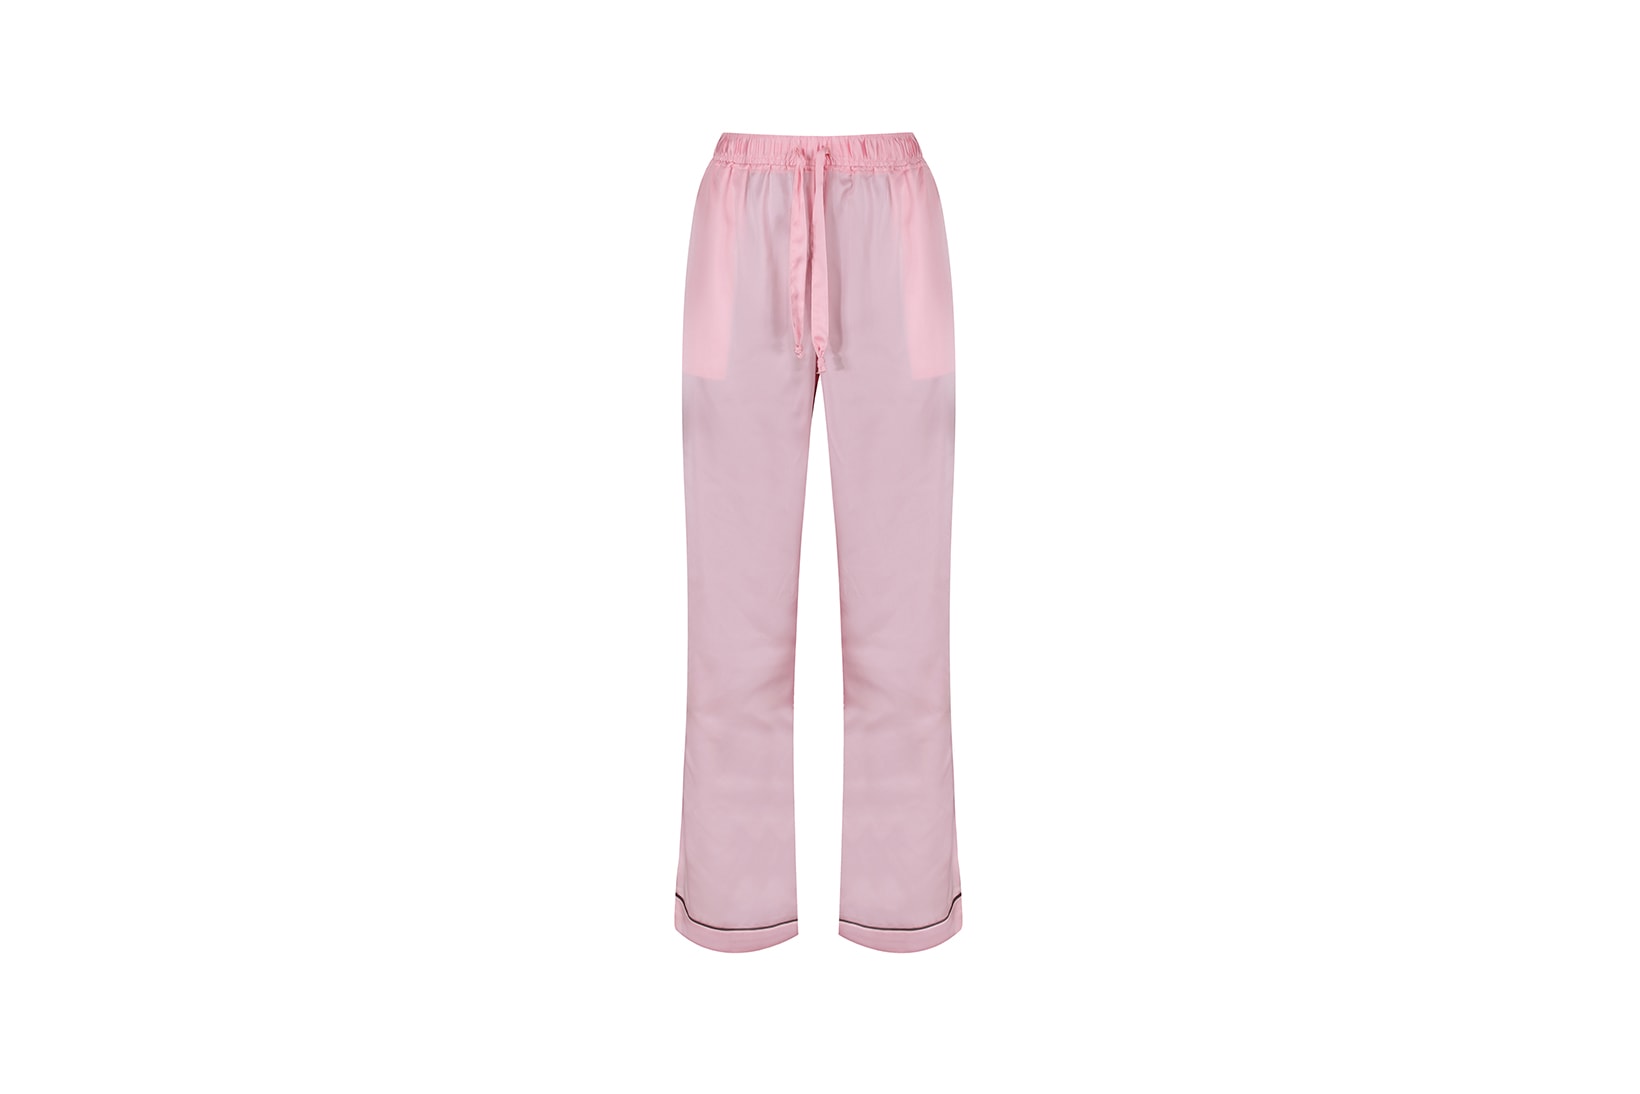 juicy couture nightwear collection pajama shorts pants